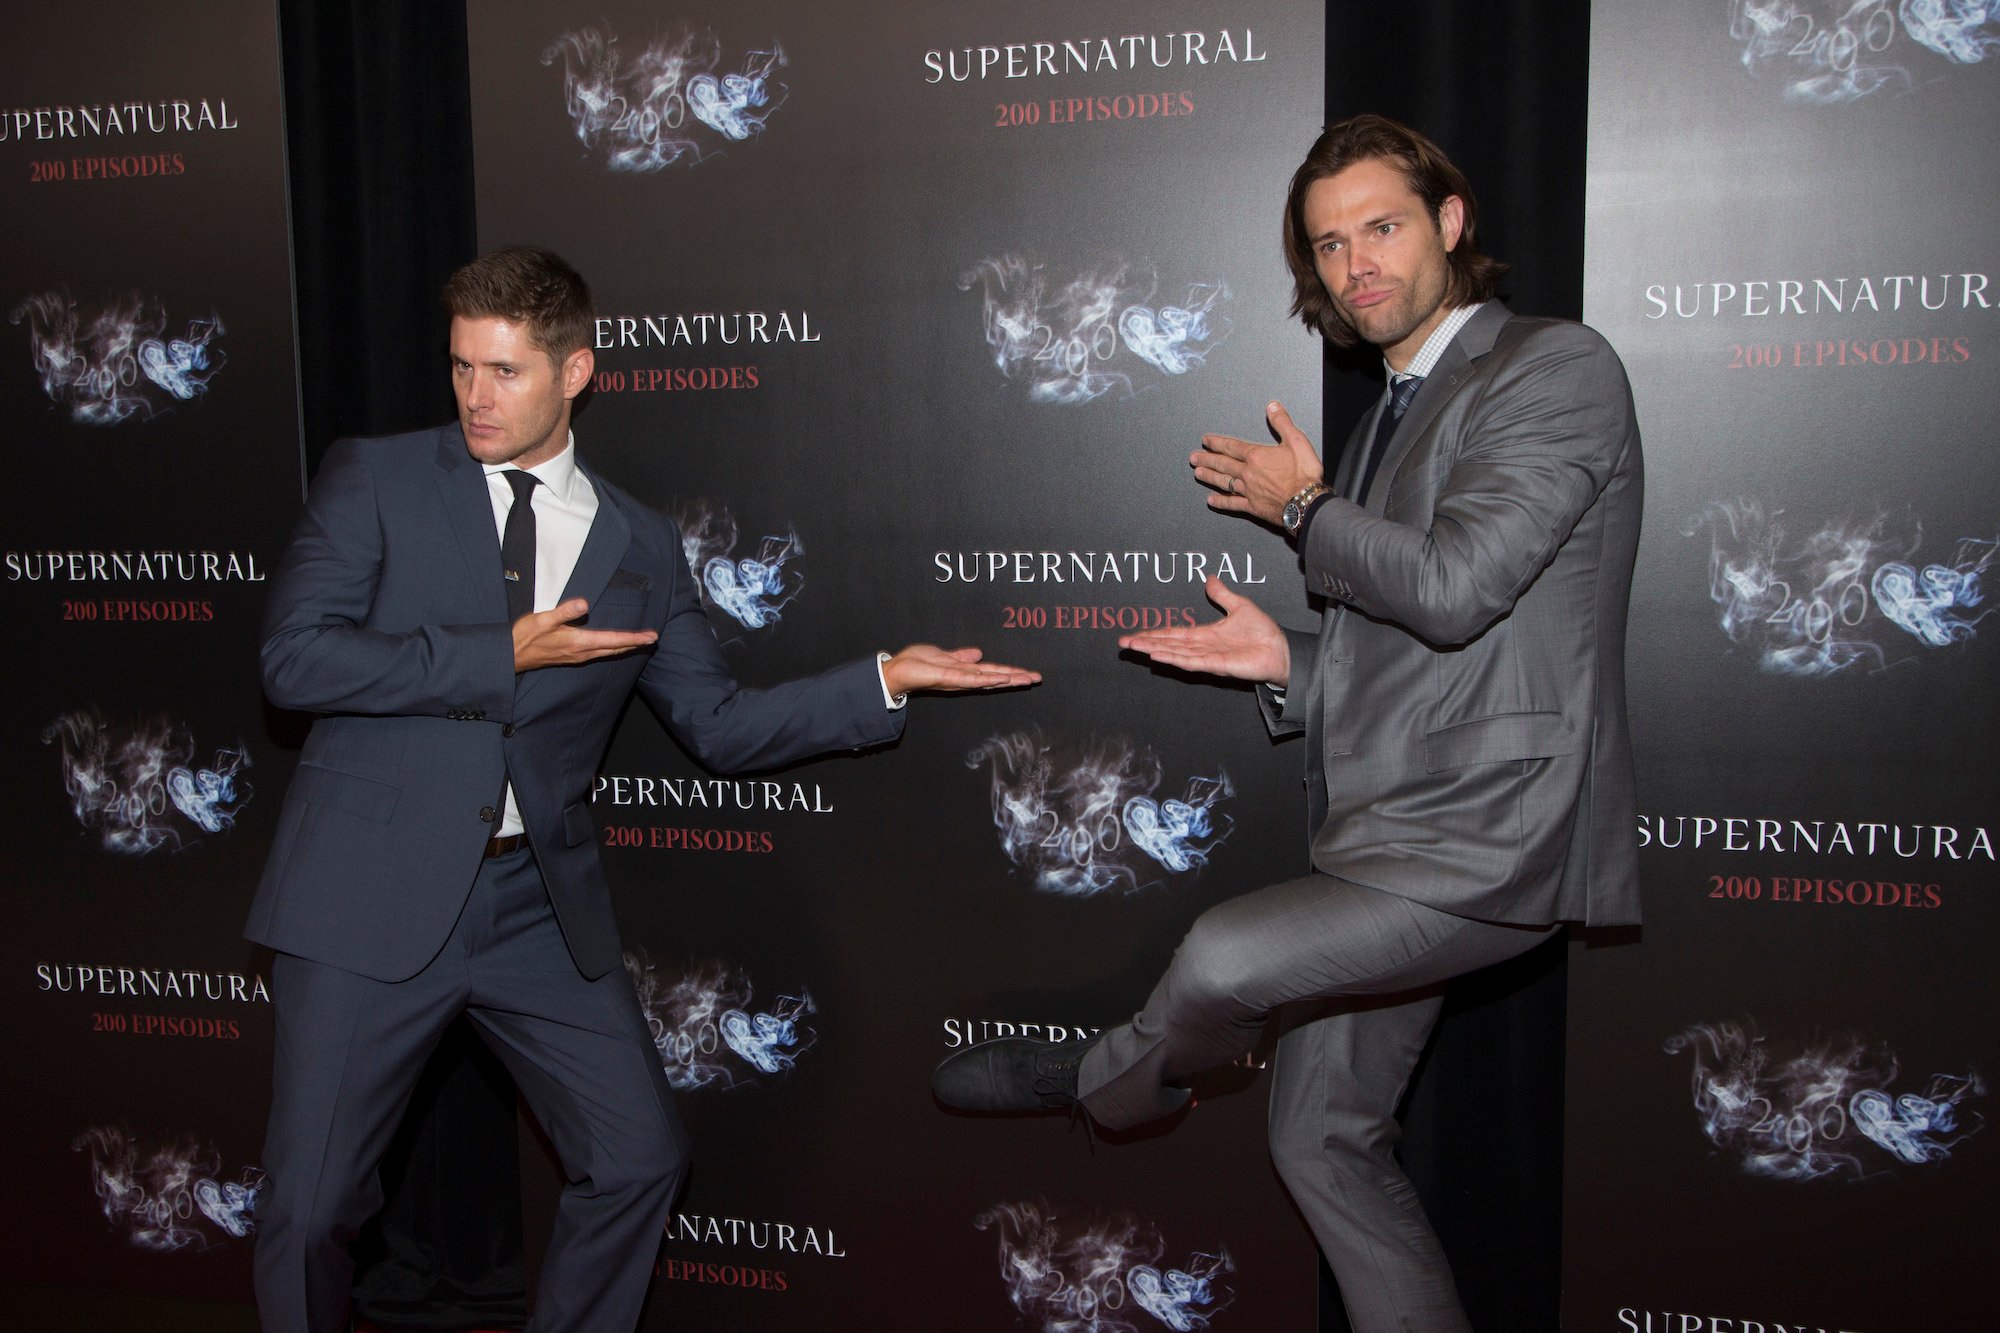 Jensen Ackles and Jared Padalecki striking a silly pose in front of a black background